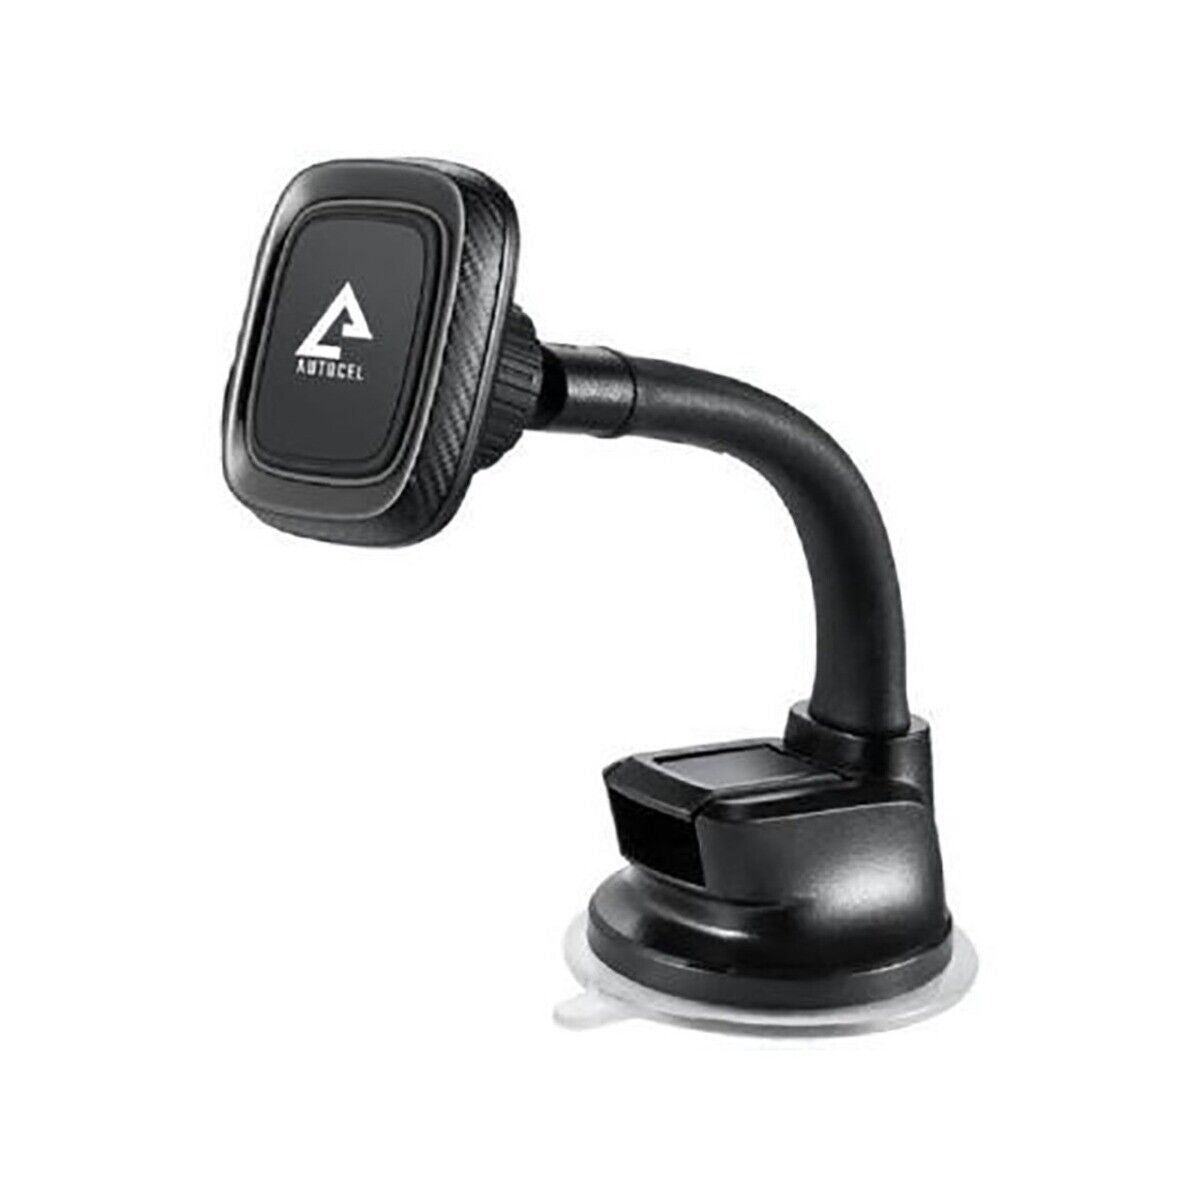 Magnetic Suction Cup Mount 180 degree